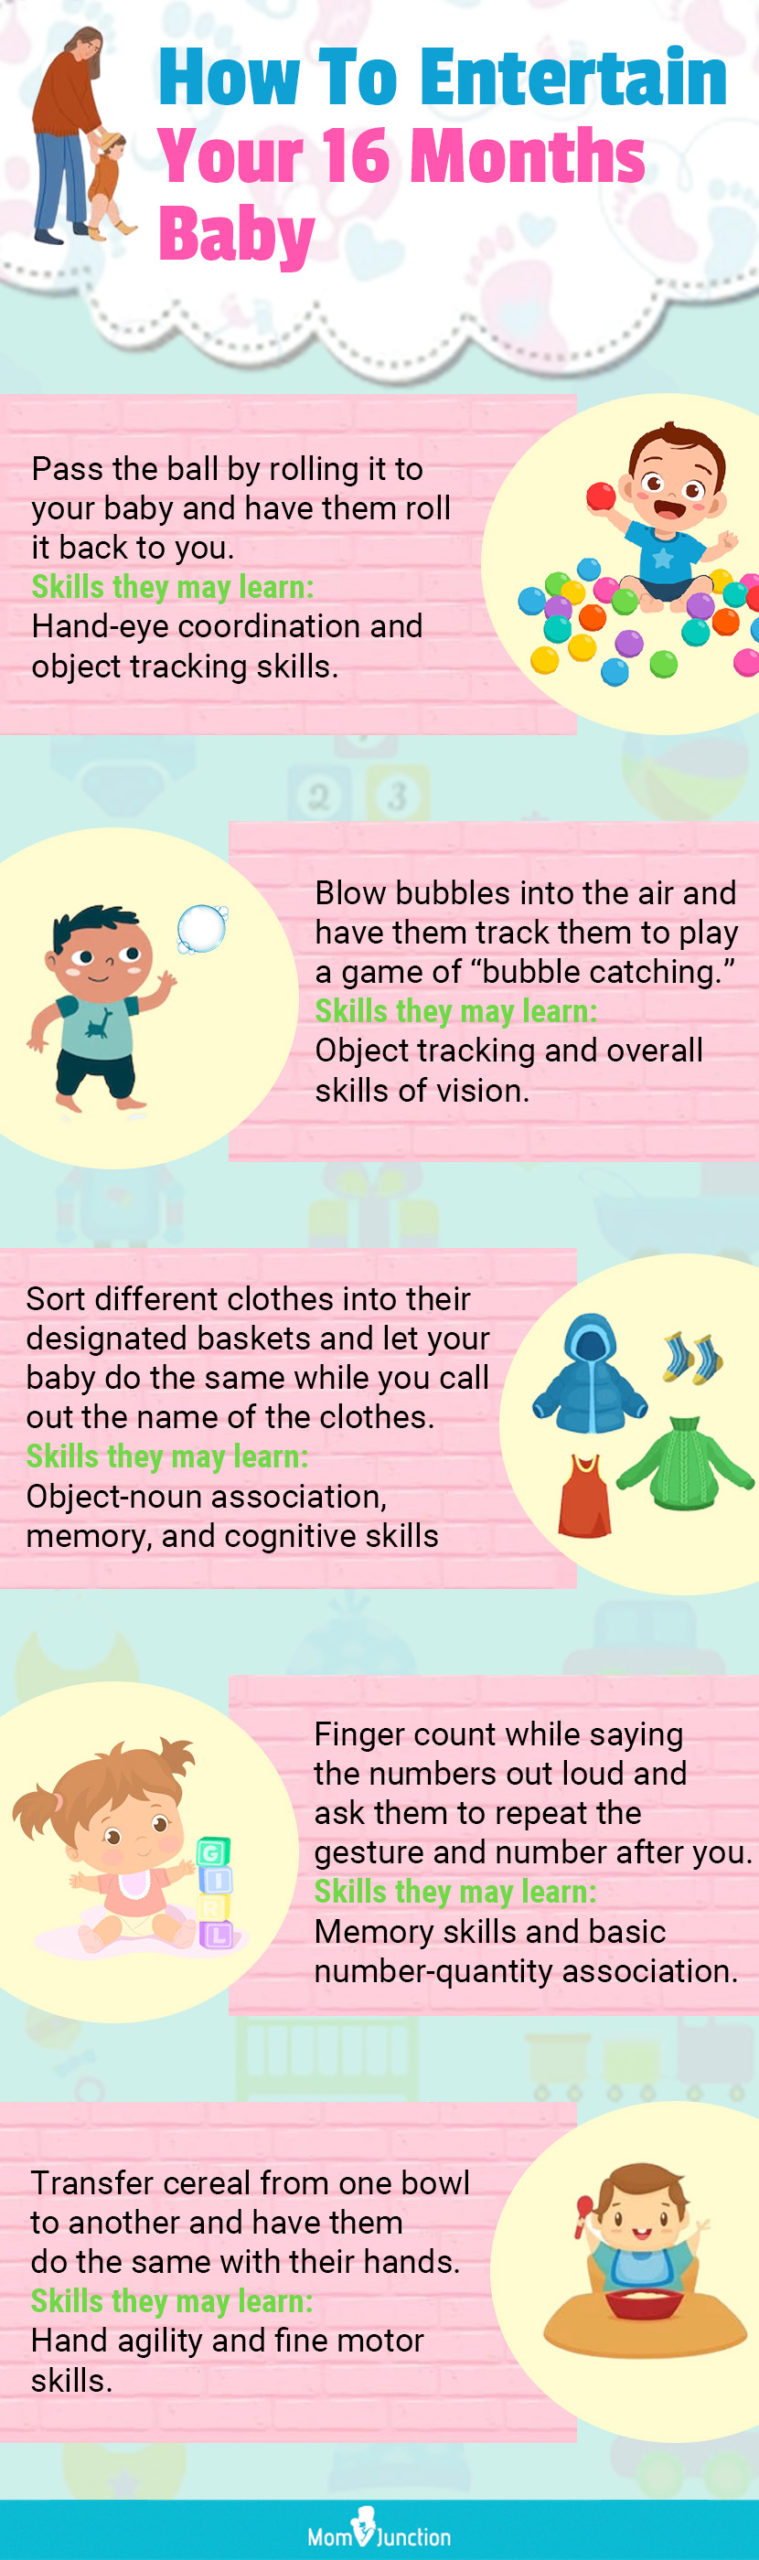 how to entertain your 16 months baby recovered (infographic)